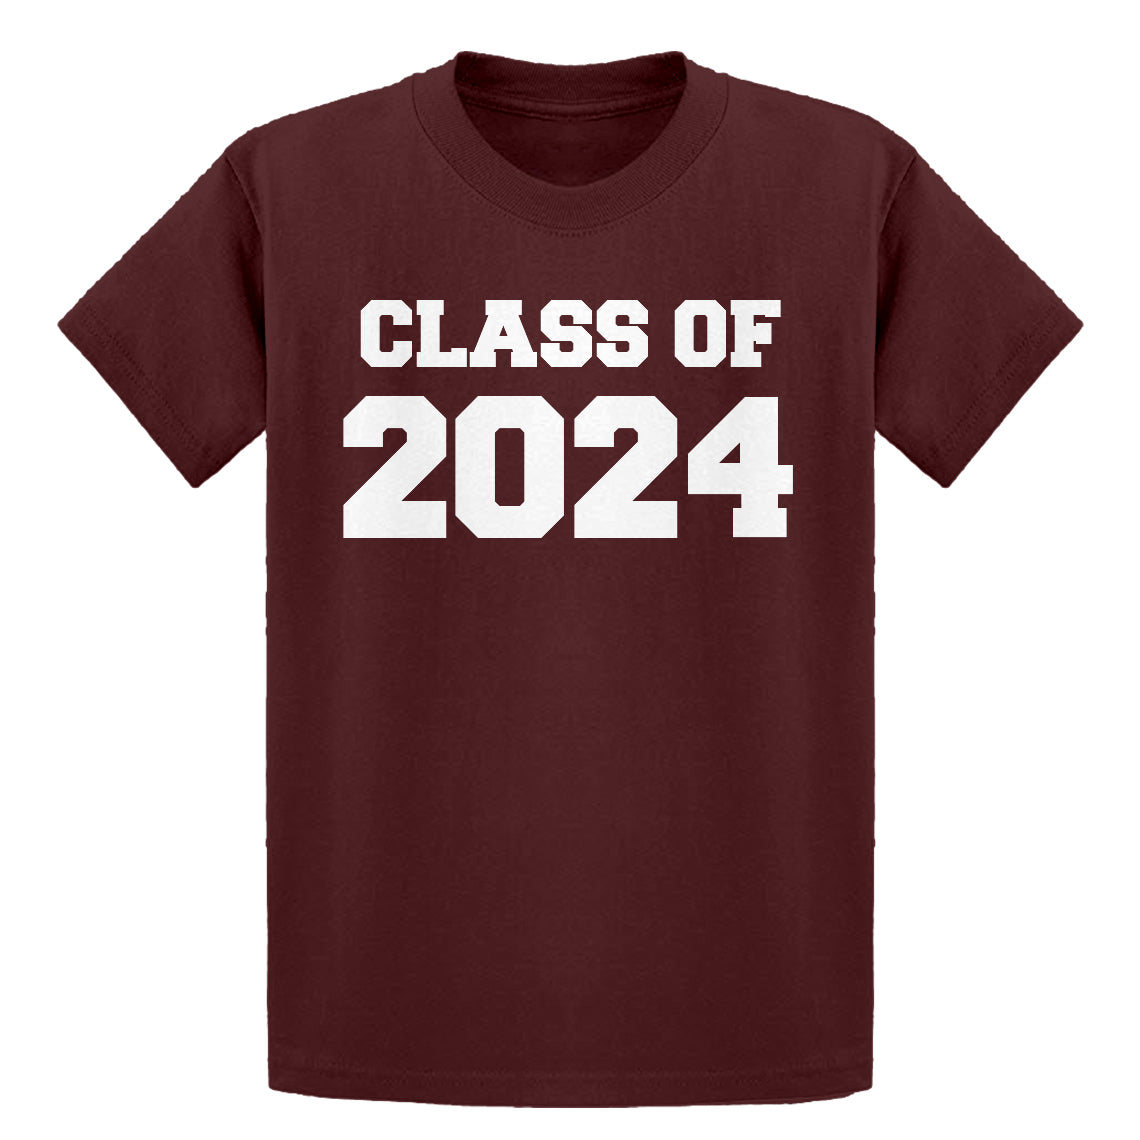 Youth Class of 2024 Kids Tshirt Indica Plateau